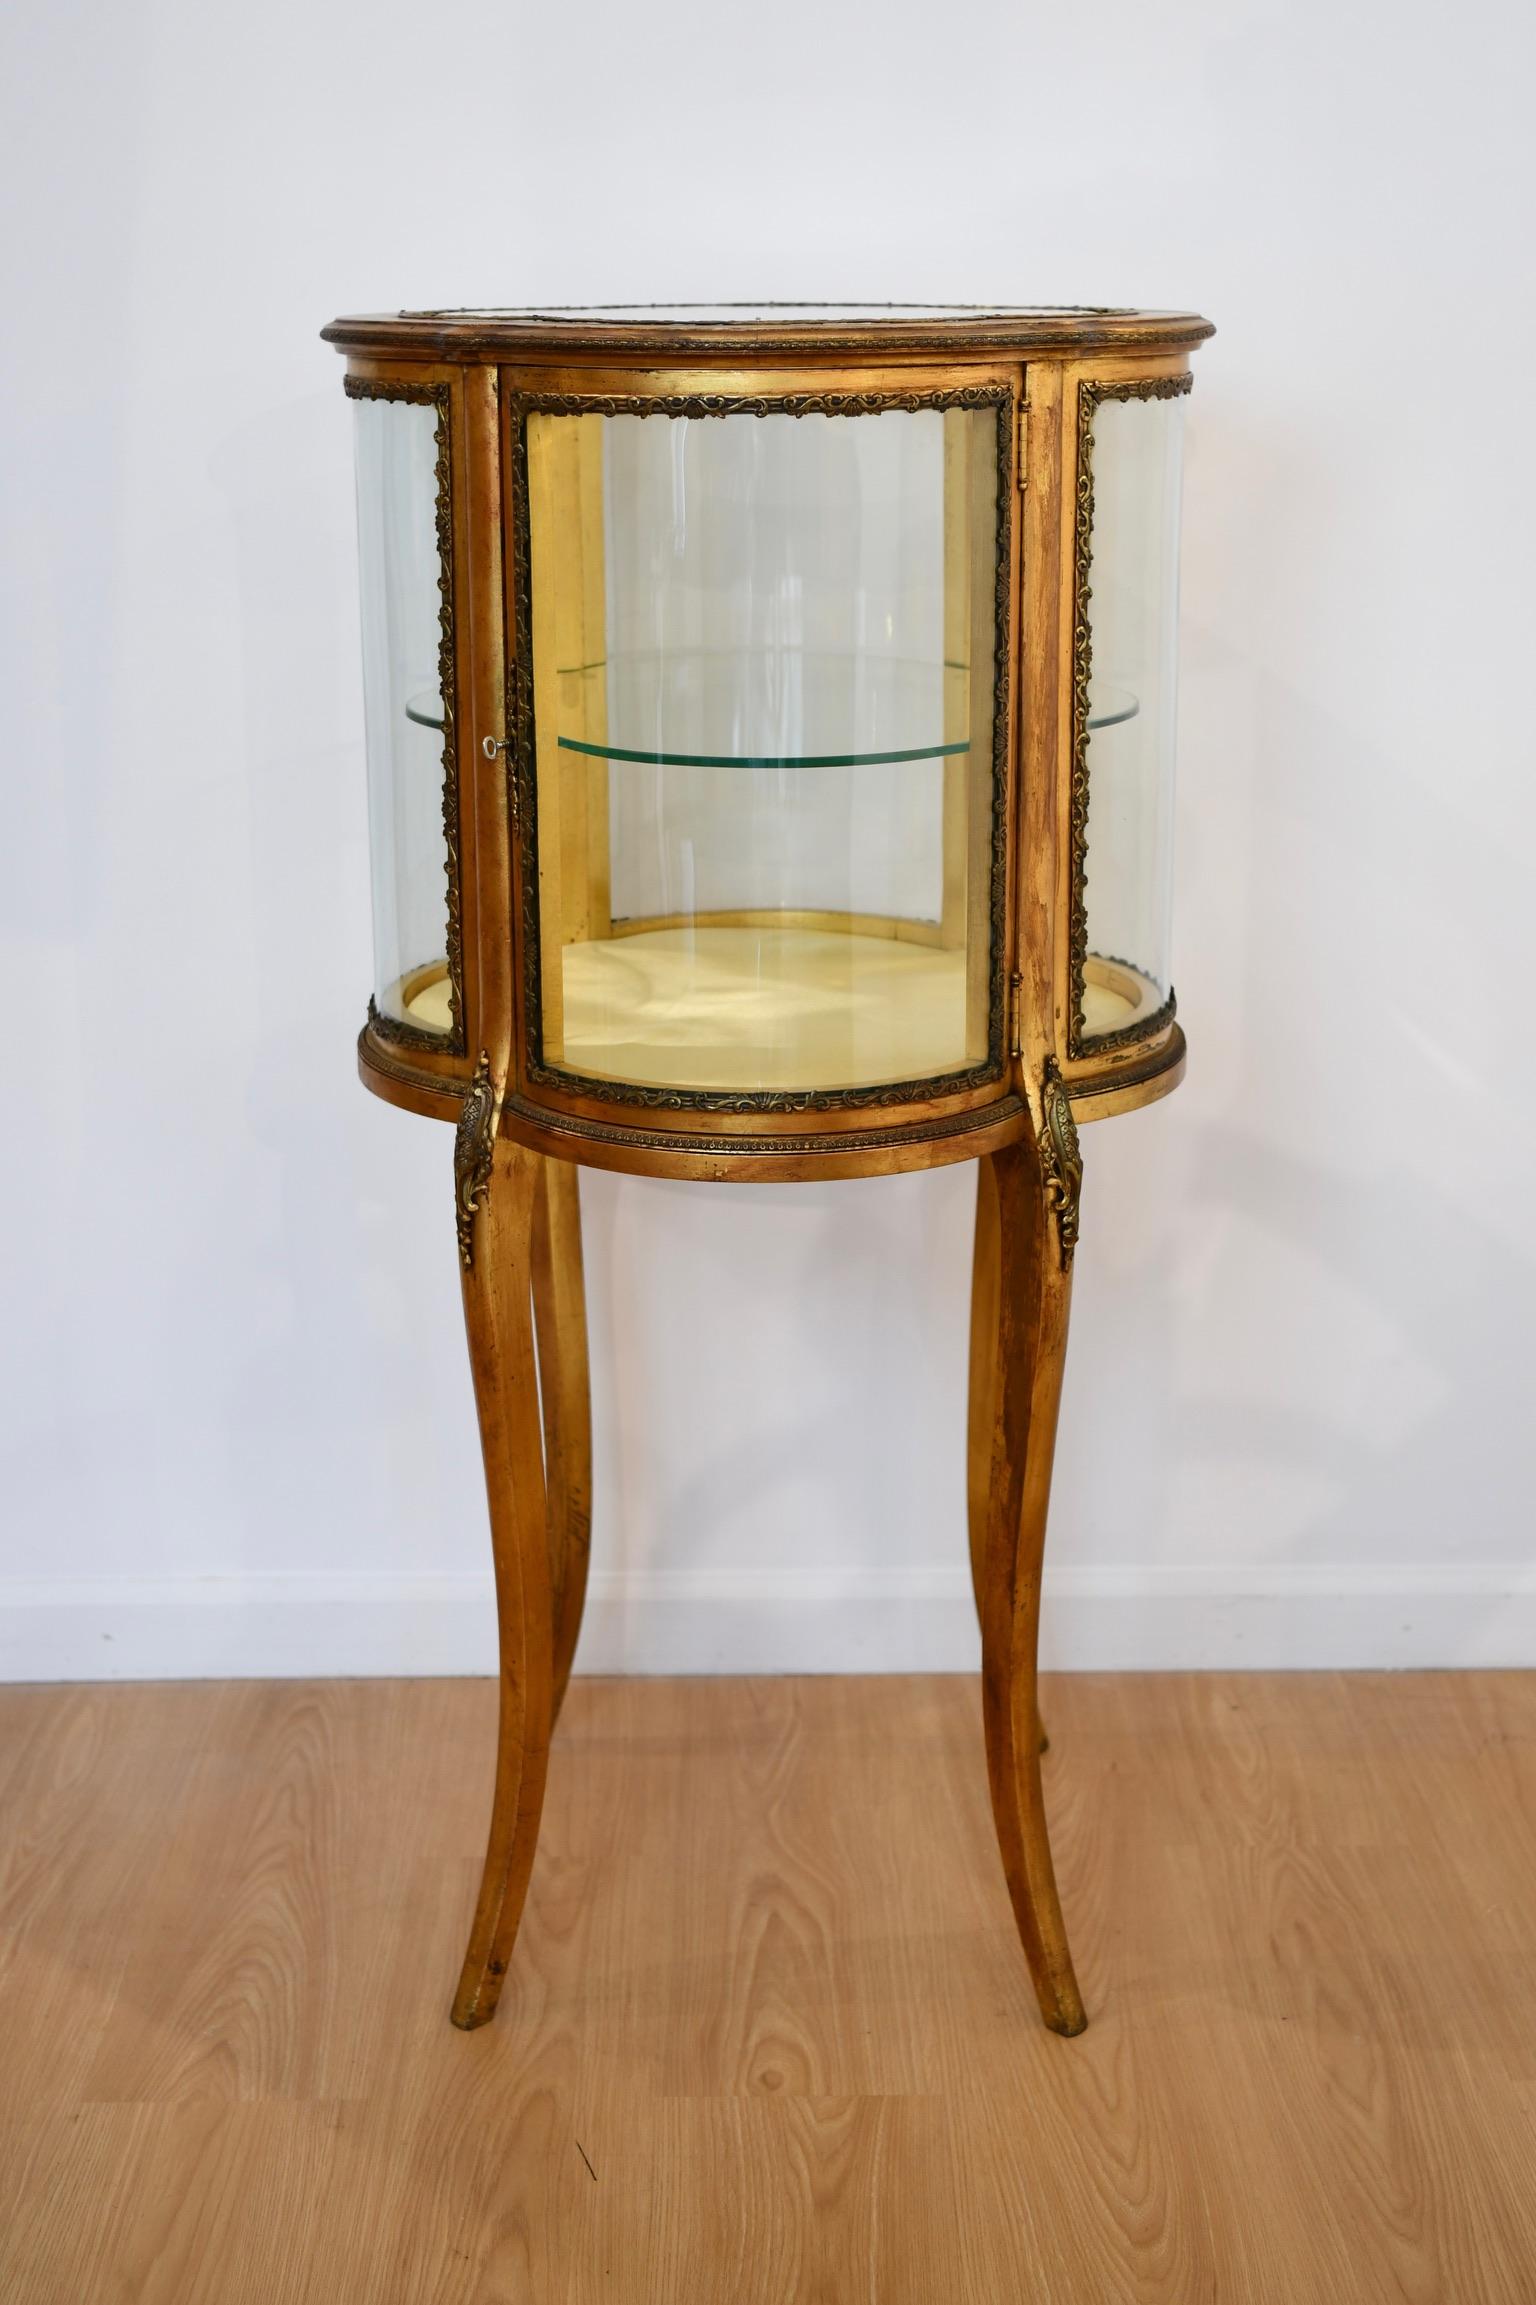 Antique Louis XV style gilt curio vitrine with crown glass on all sides. Includes key however lock does not appear to be functional. Dimensions: 34.25